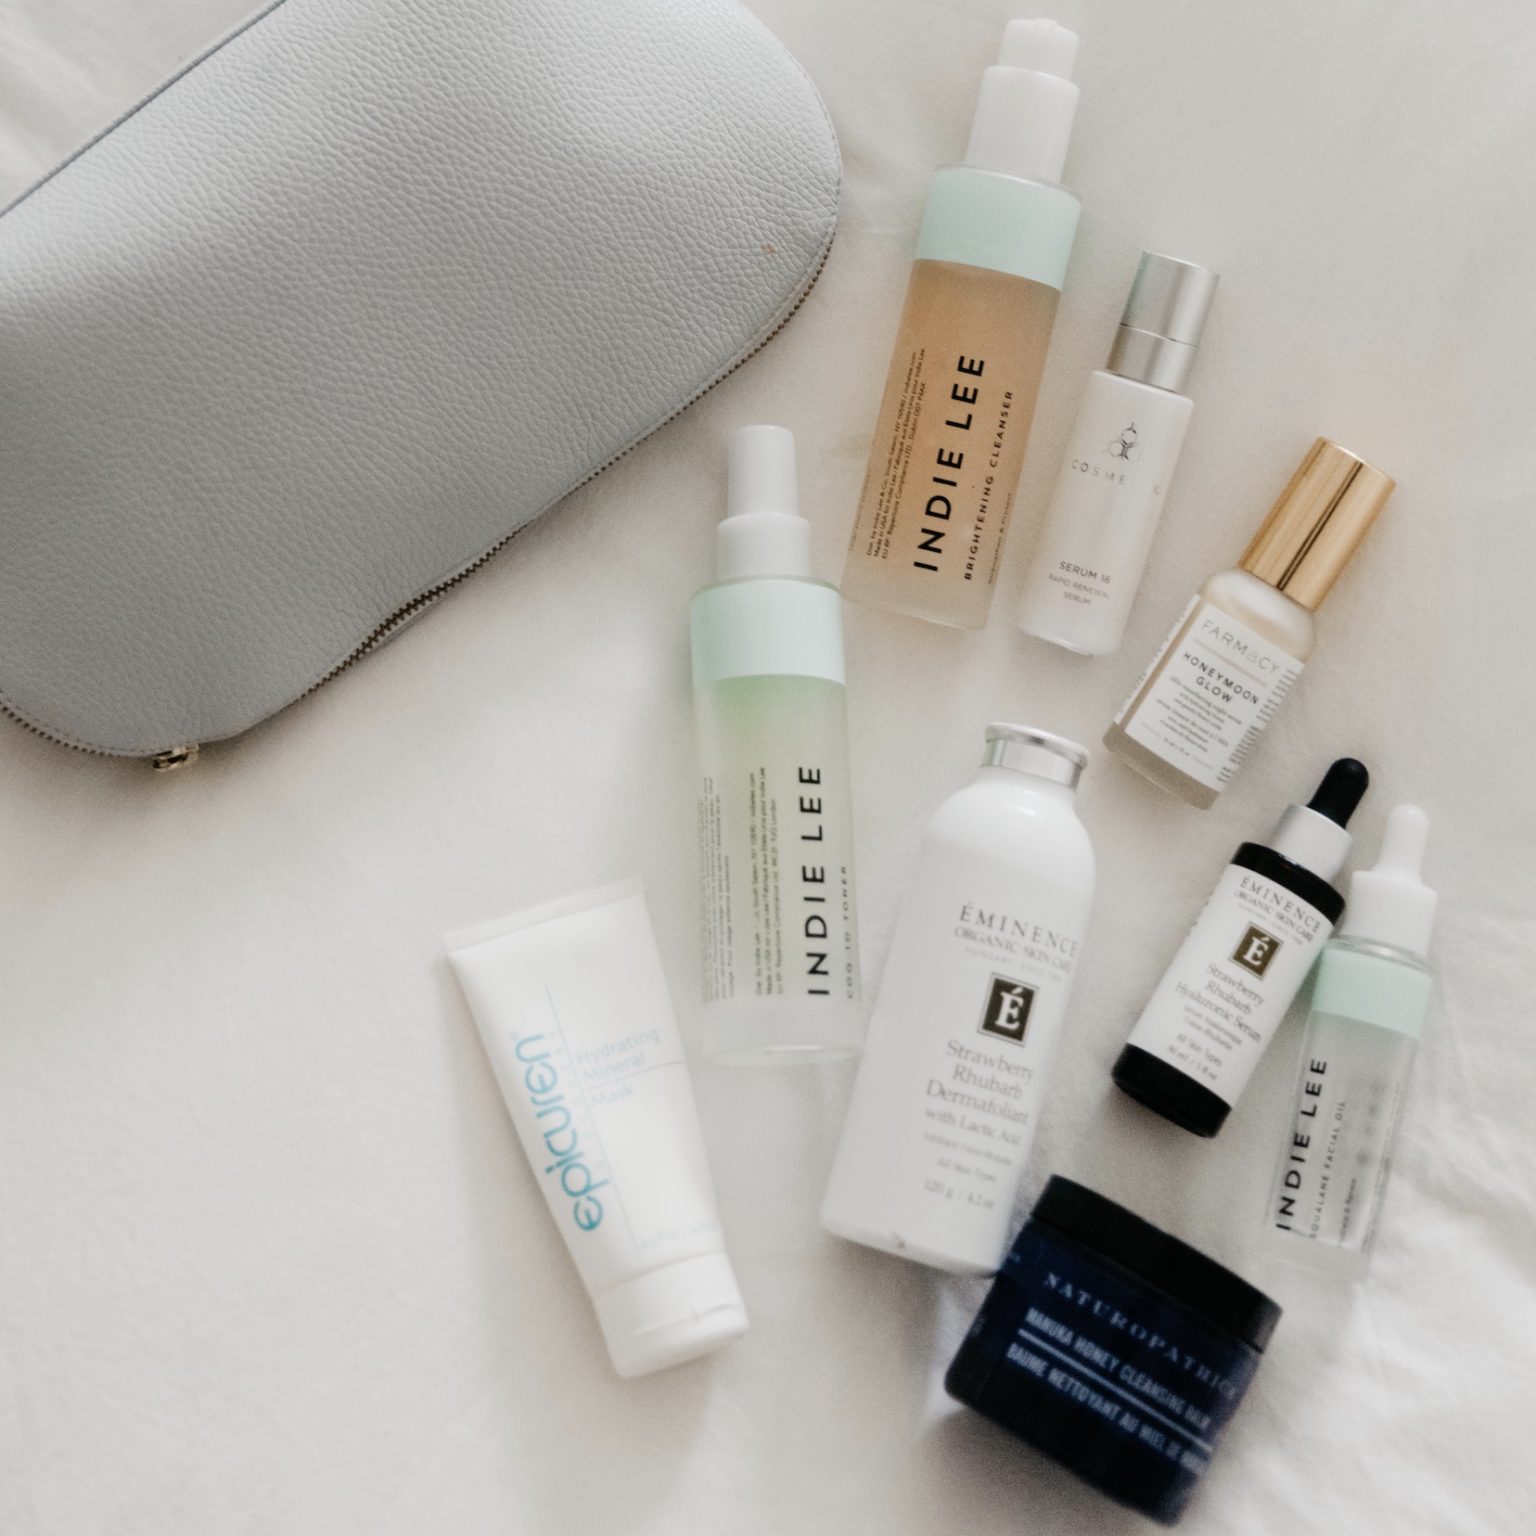 My Skincare Journey + An Aging Gracefully Routine Wellhaus